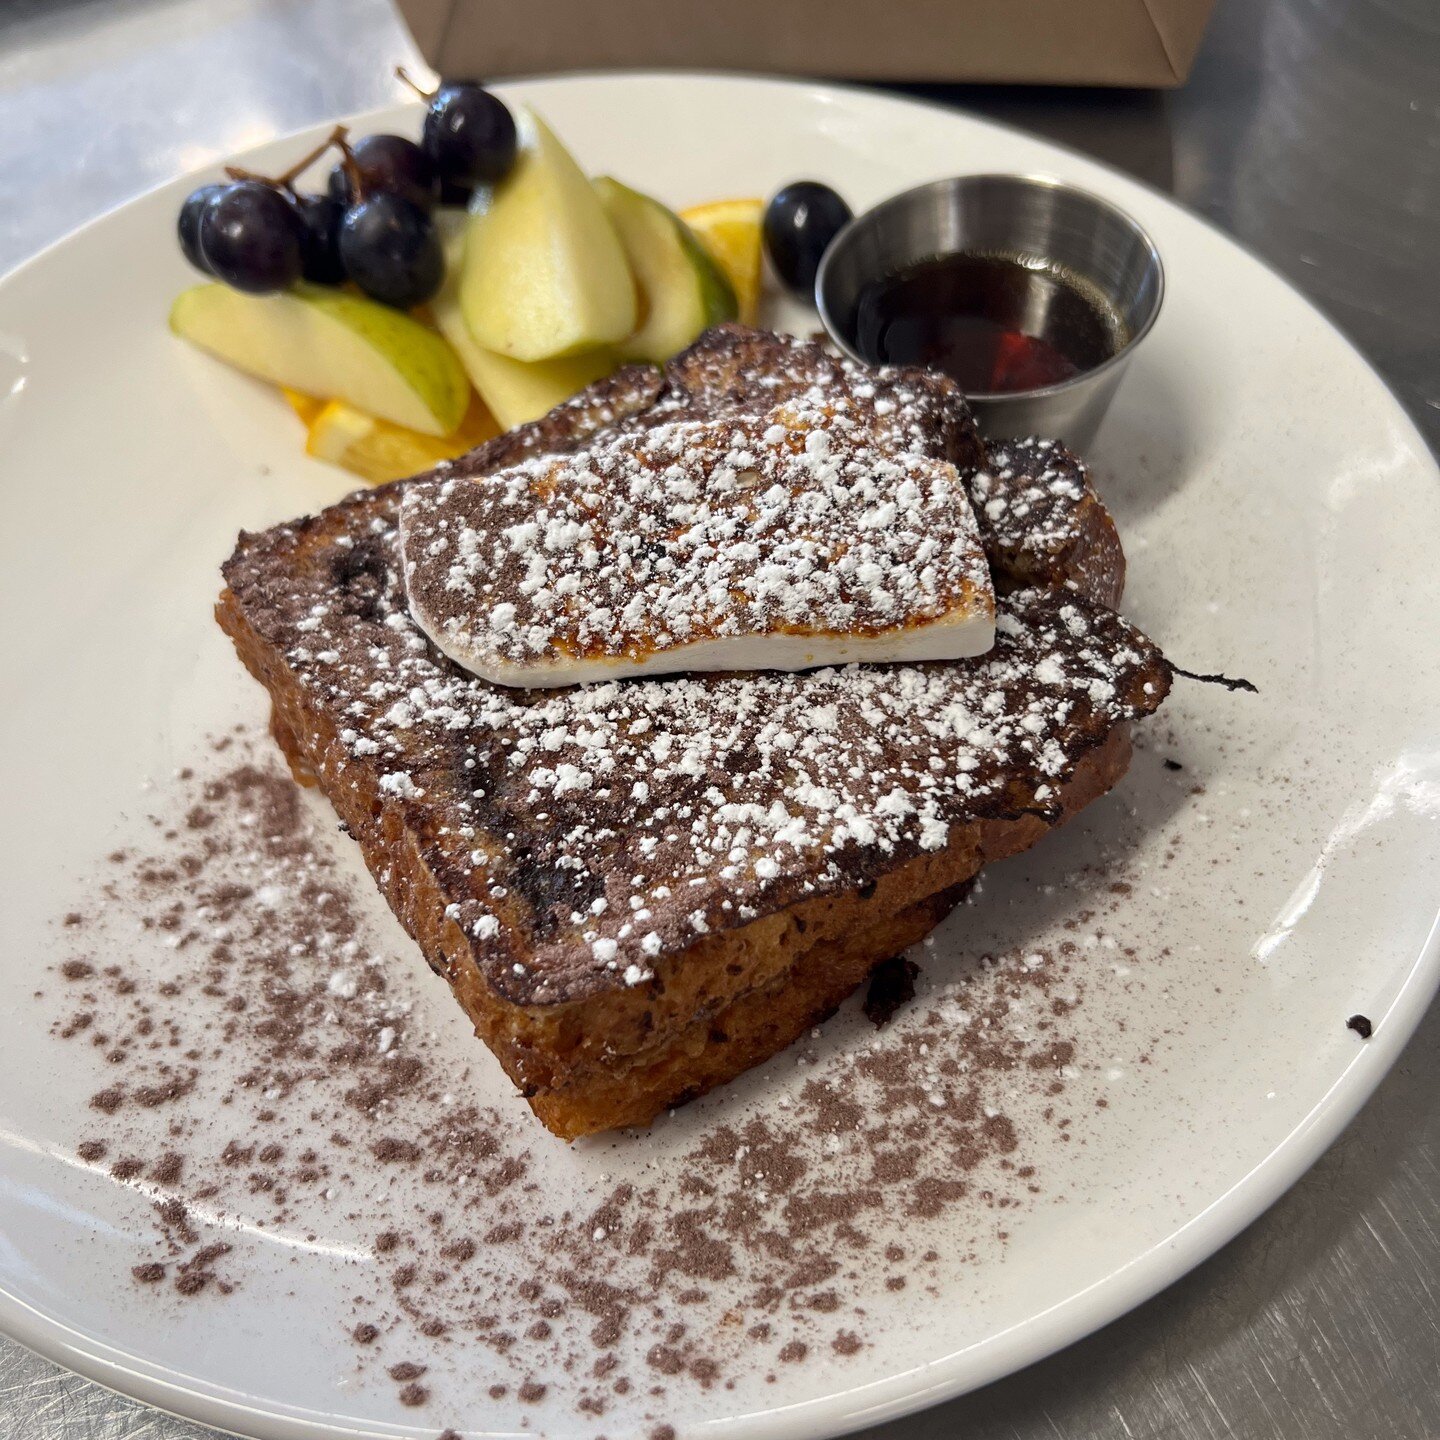 UP NEXT!
&quot;HOT CHOCOLATE&quot; FRENCH TOAST

cinnamon-cocoa babka bread, toasted marshmallow, Vermont maple syrup